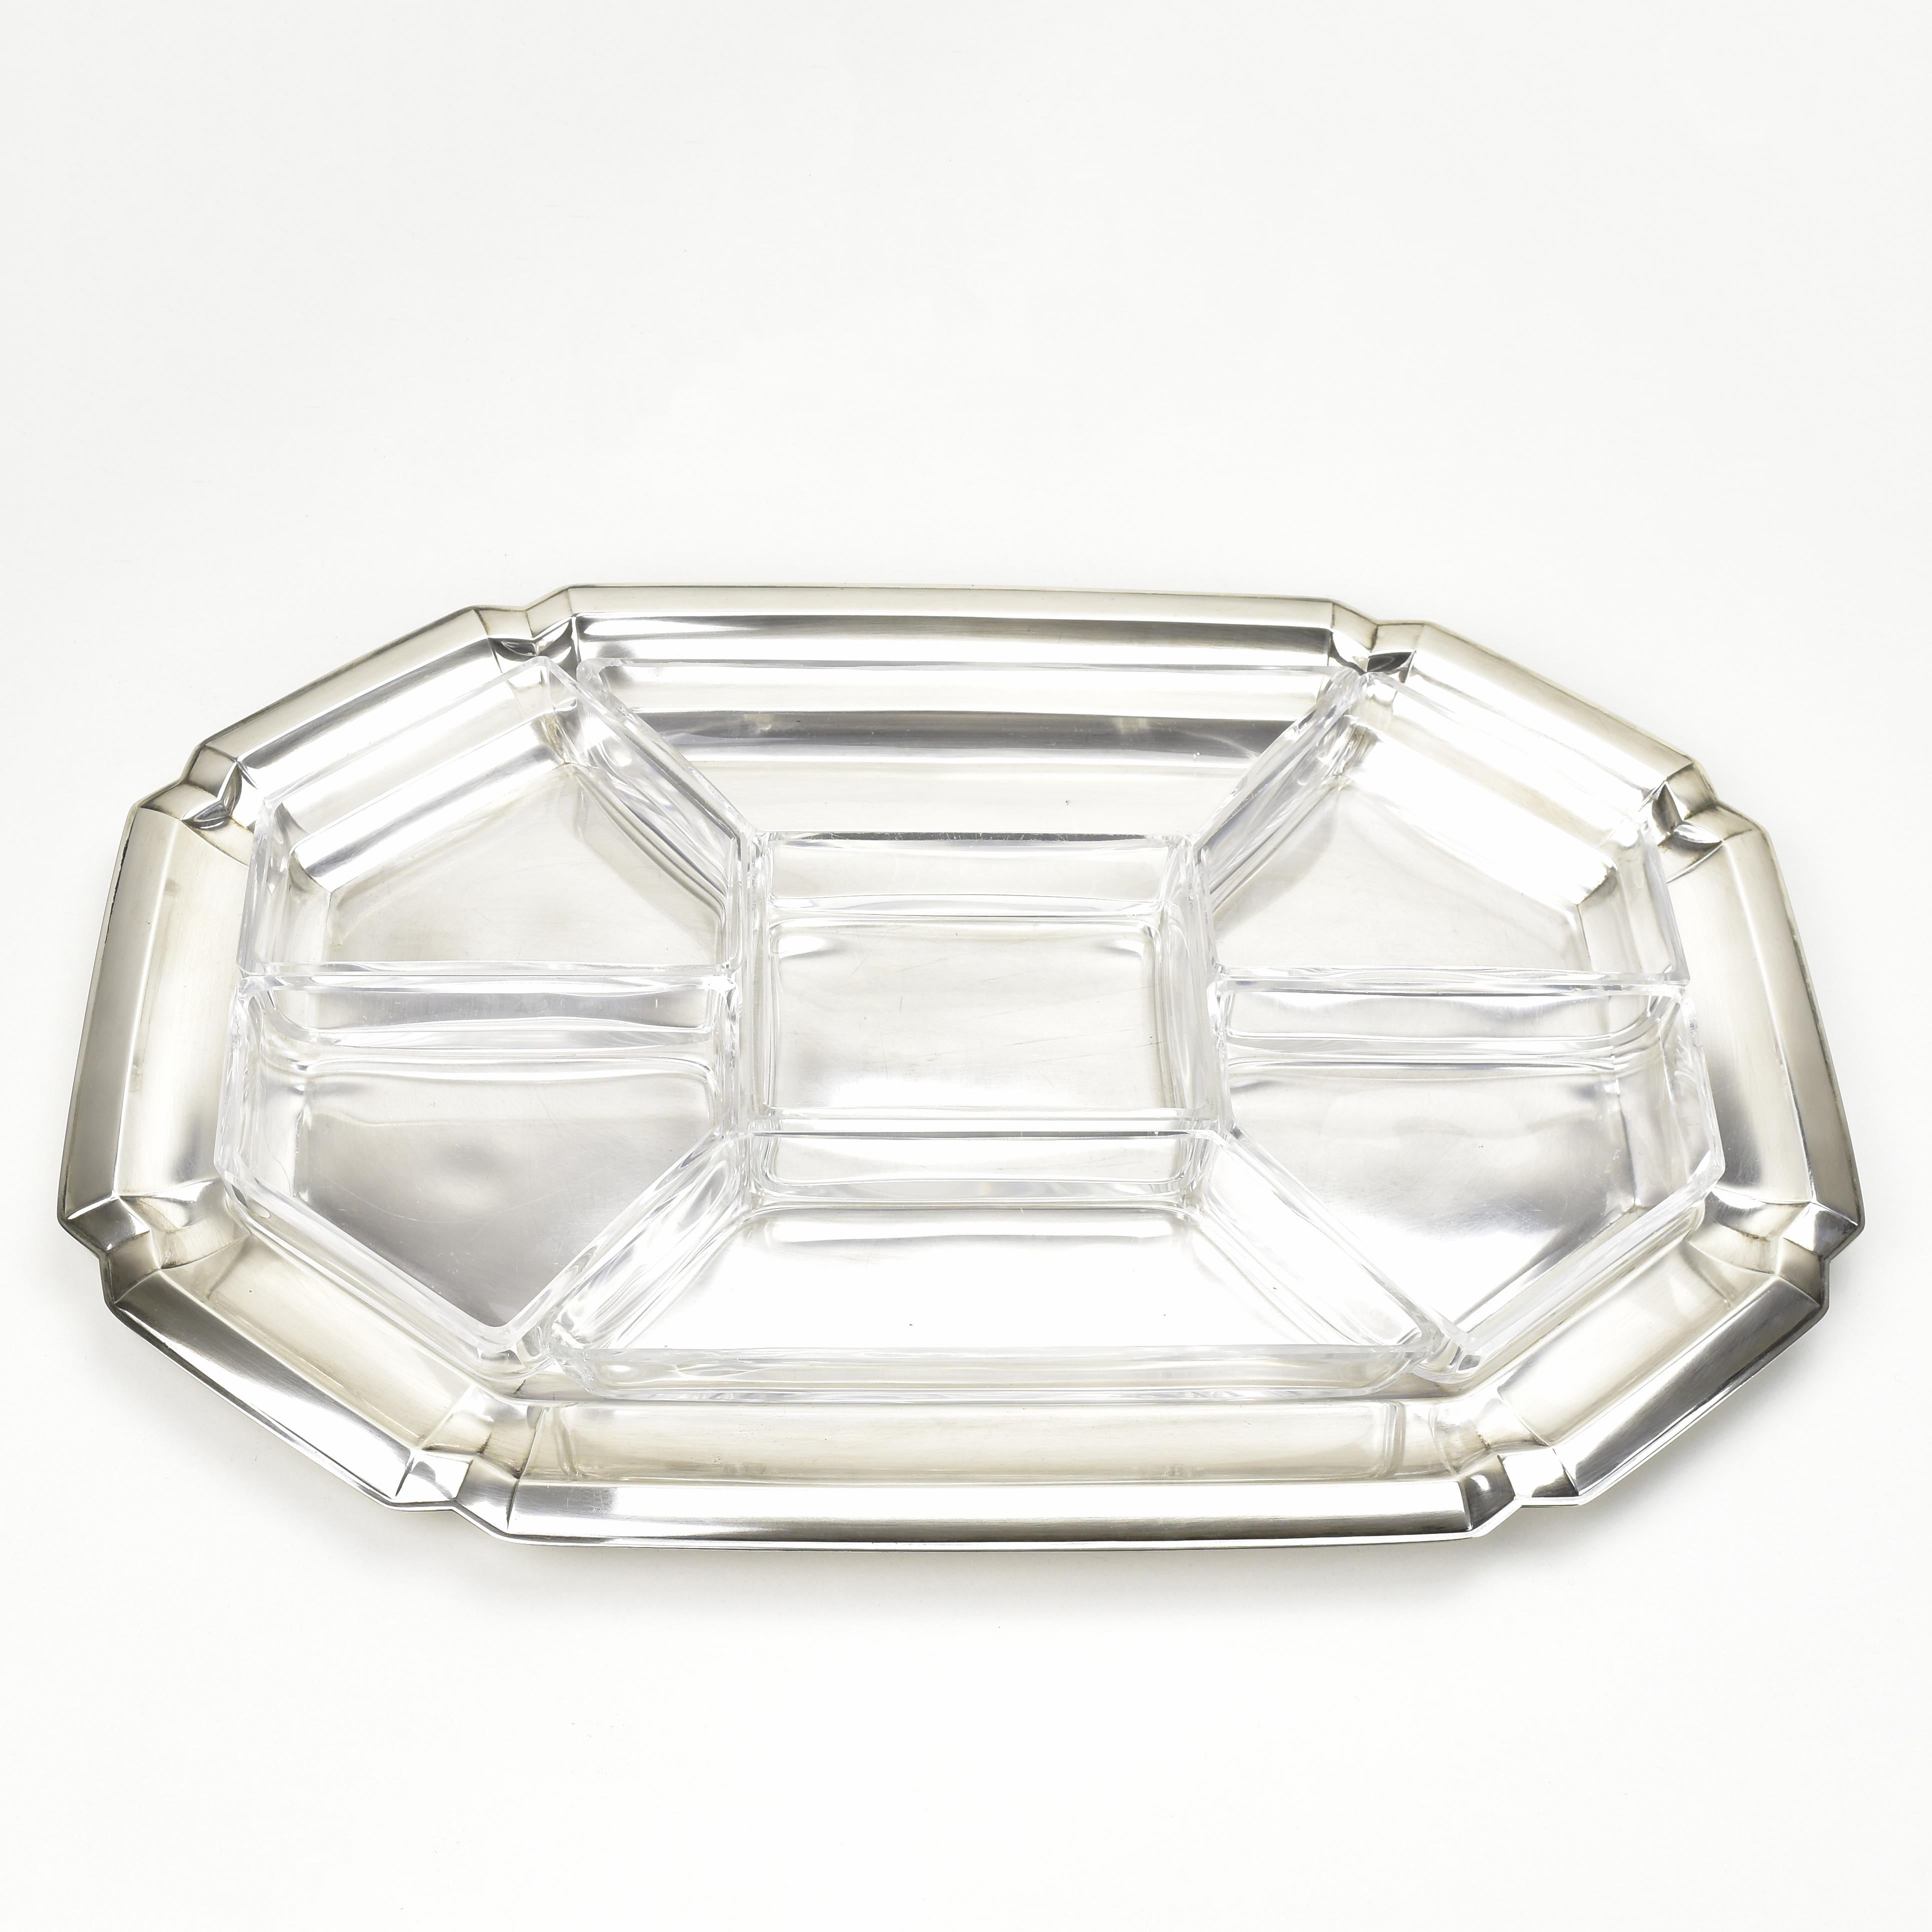 German Large Art Deco Cabaret Bar Snack Tray by Quist Silverplate & Cut Crystal Liners For Sale